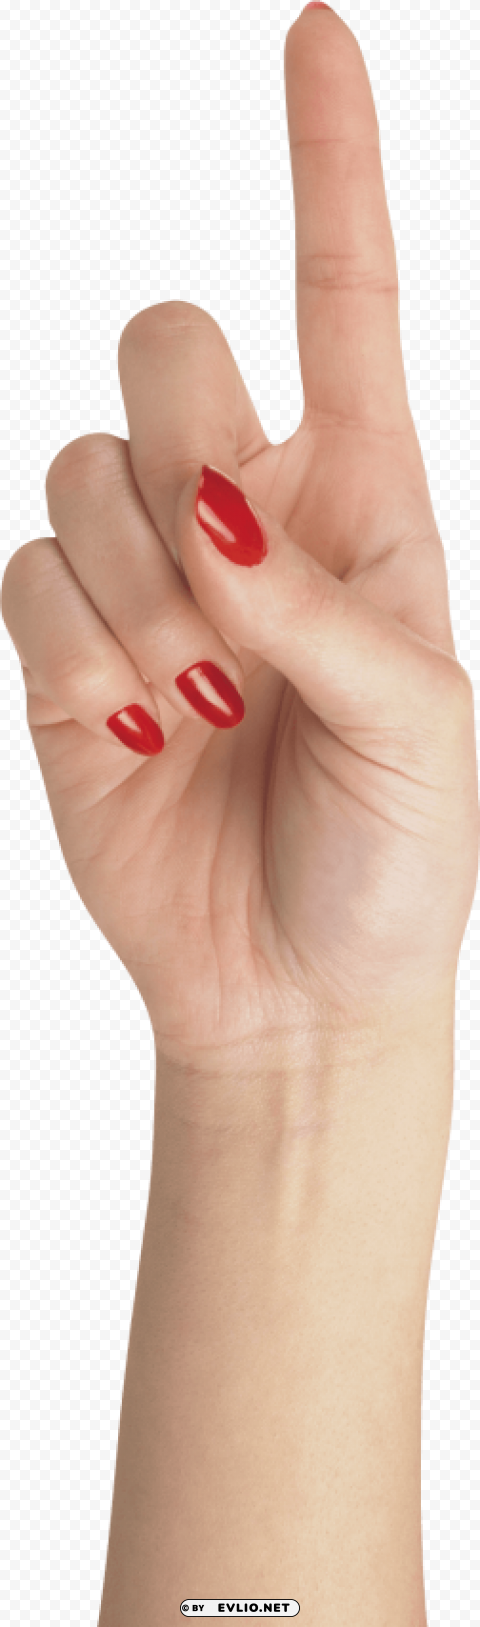 one finger hand High-quality transparent PNG images